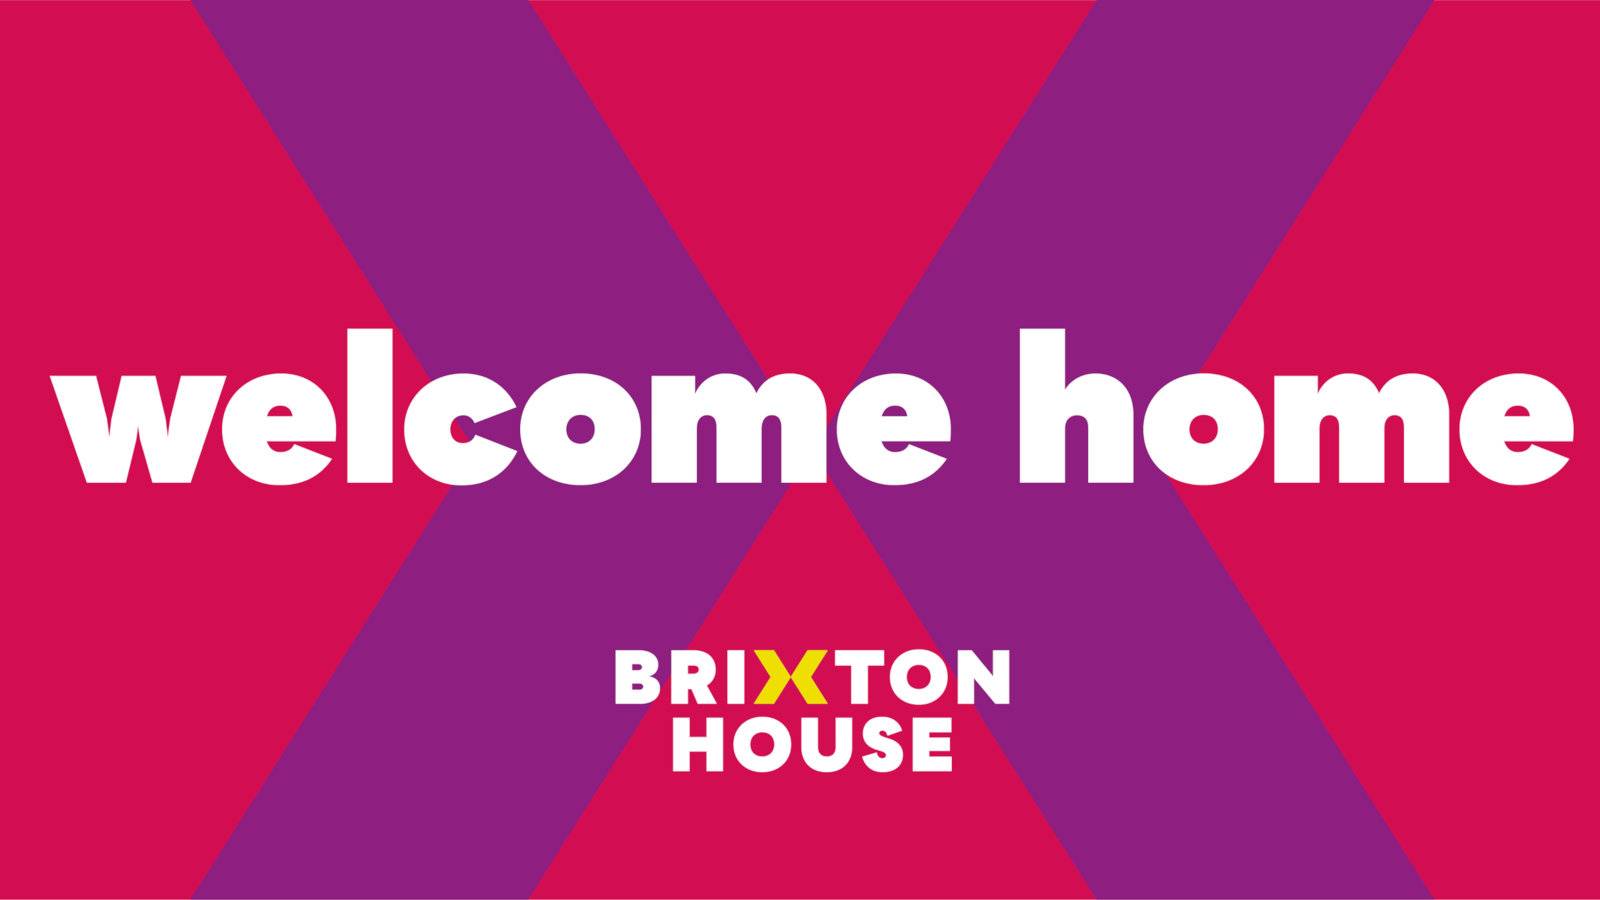 A large purple ex on a red background with the text "welcome home brixton house" over the top in white.